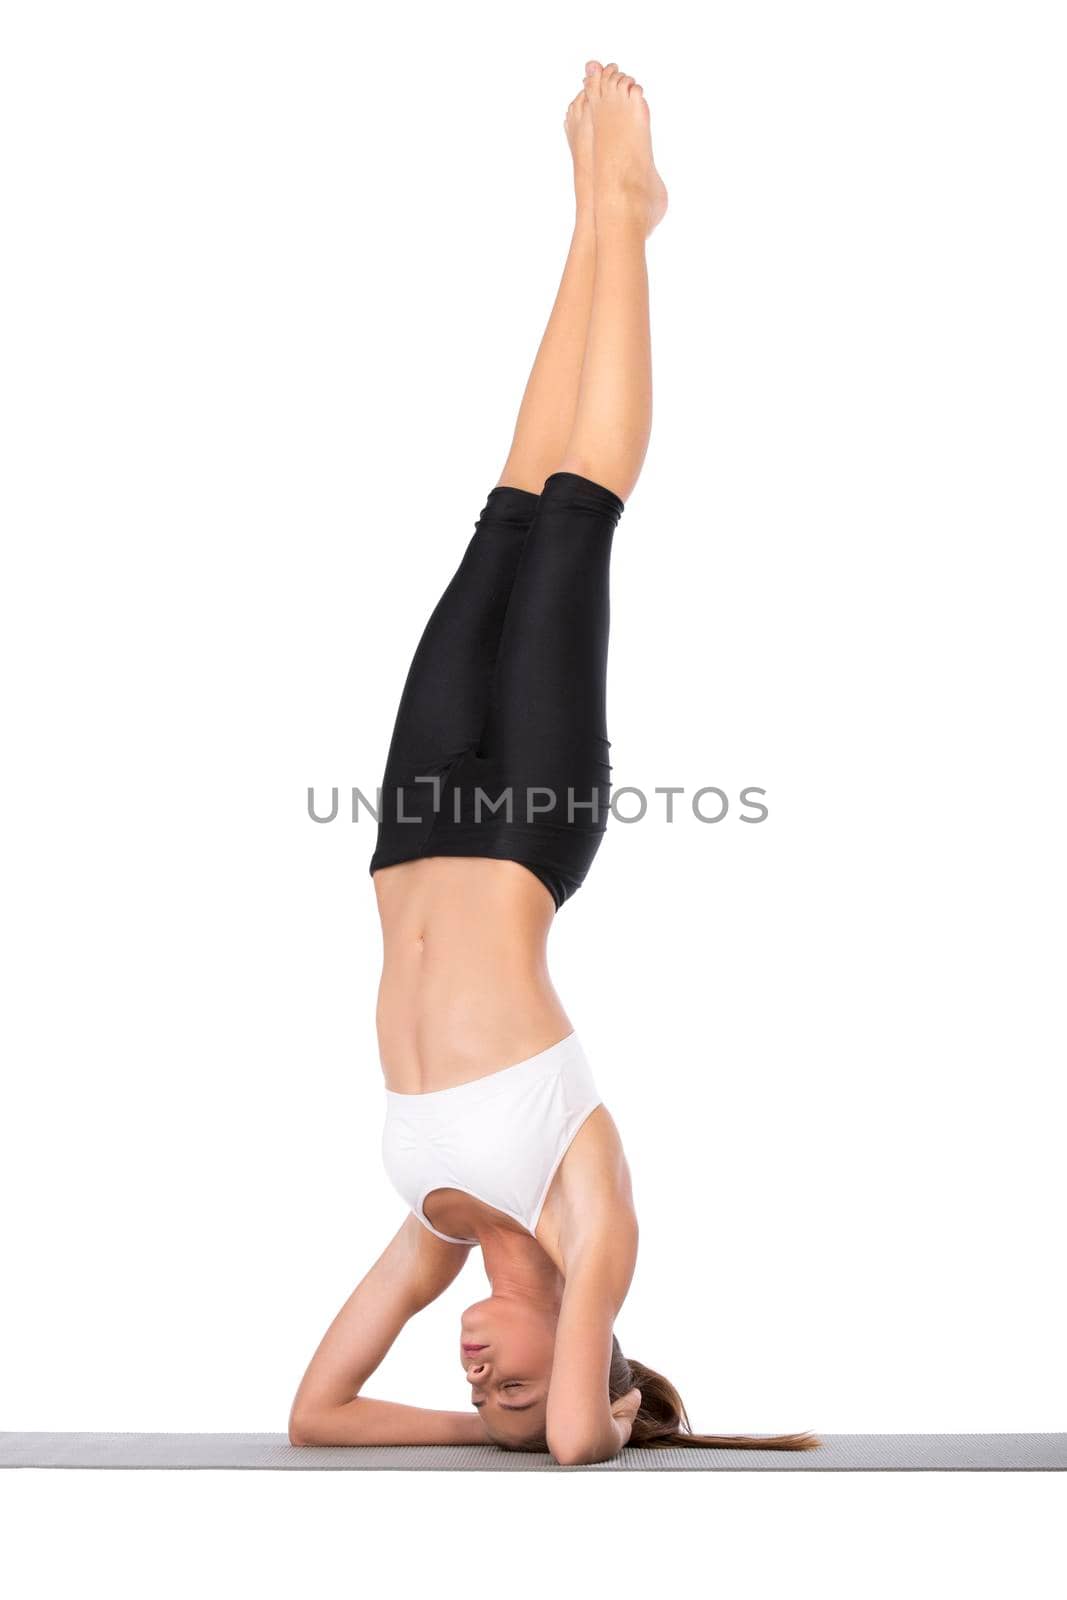 An attractive young woman standing on her head against a white background.